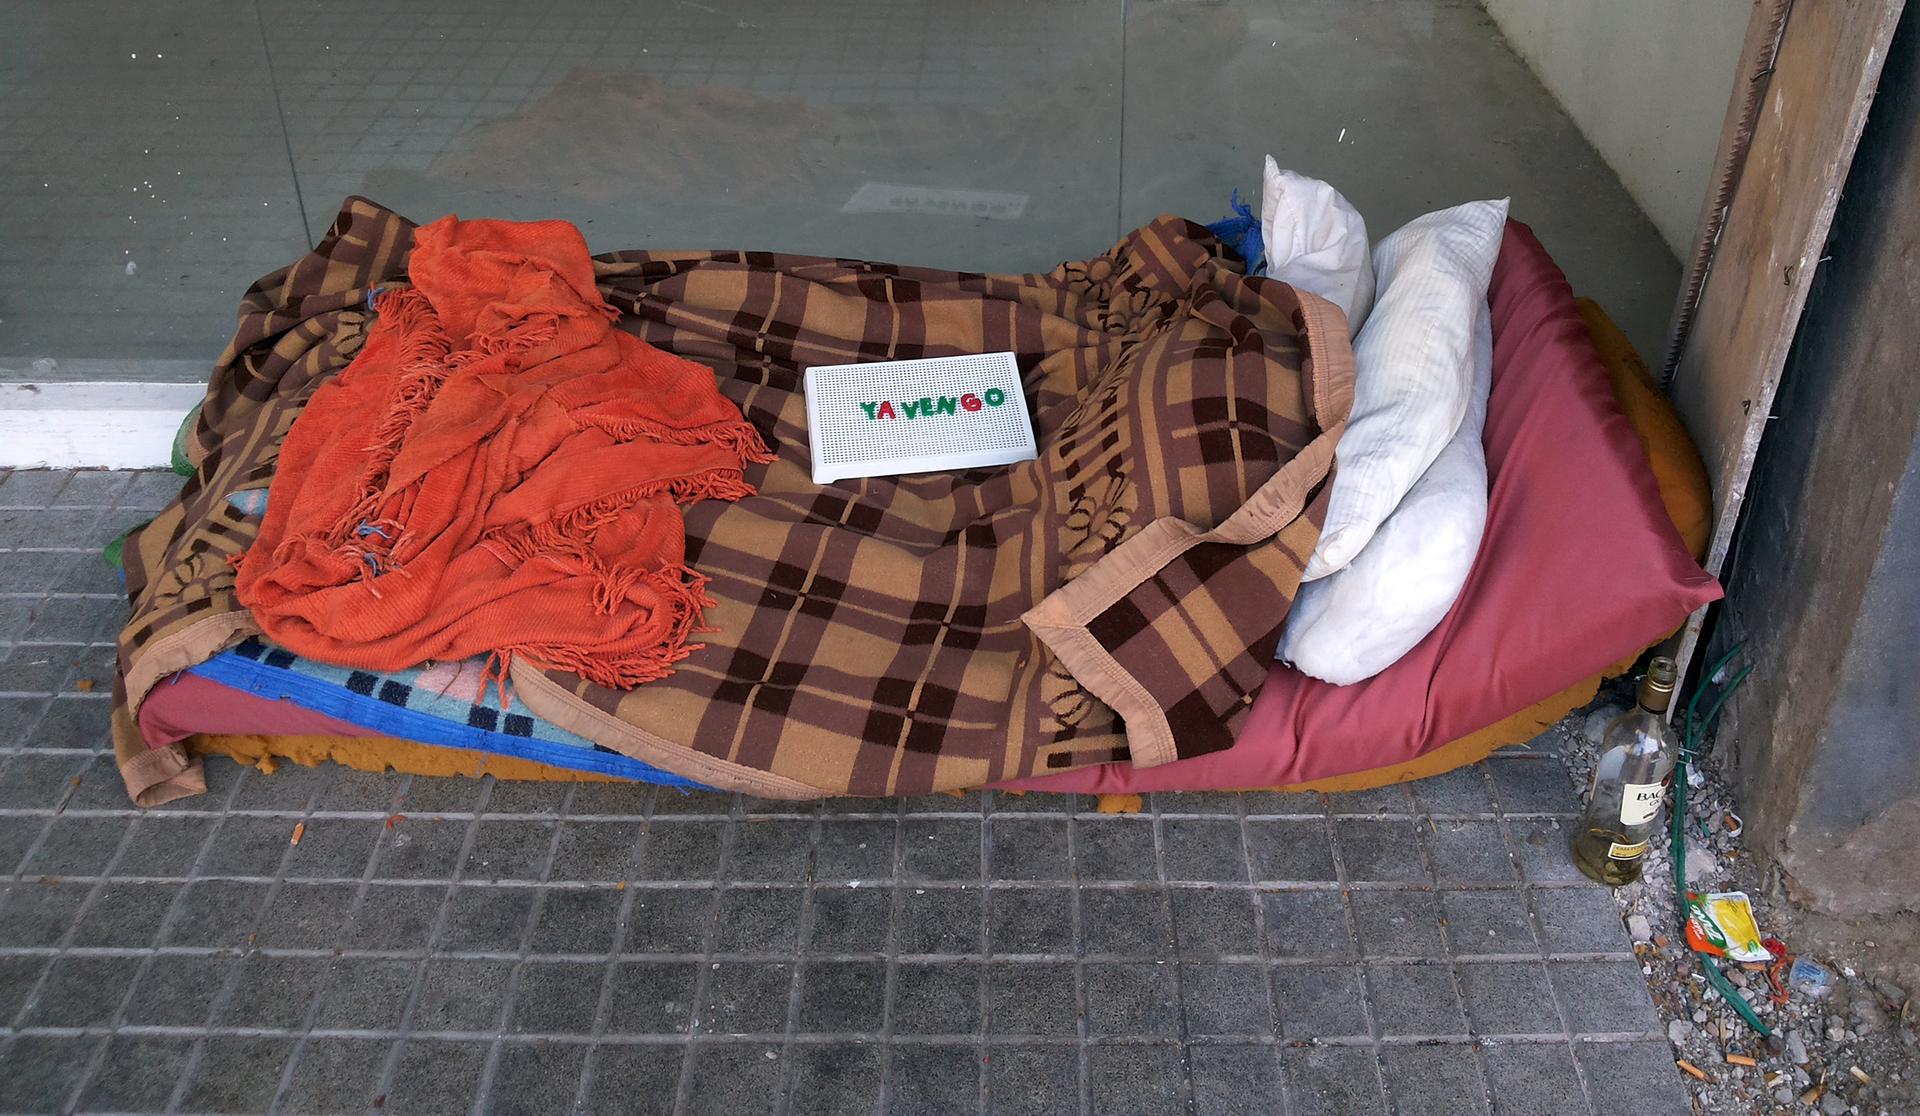 A make-shift bed of a homeless person, with a sign on top that reads "I'll be right back," in Buenos Aires, Argentina, on Sept. 11.